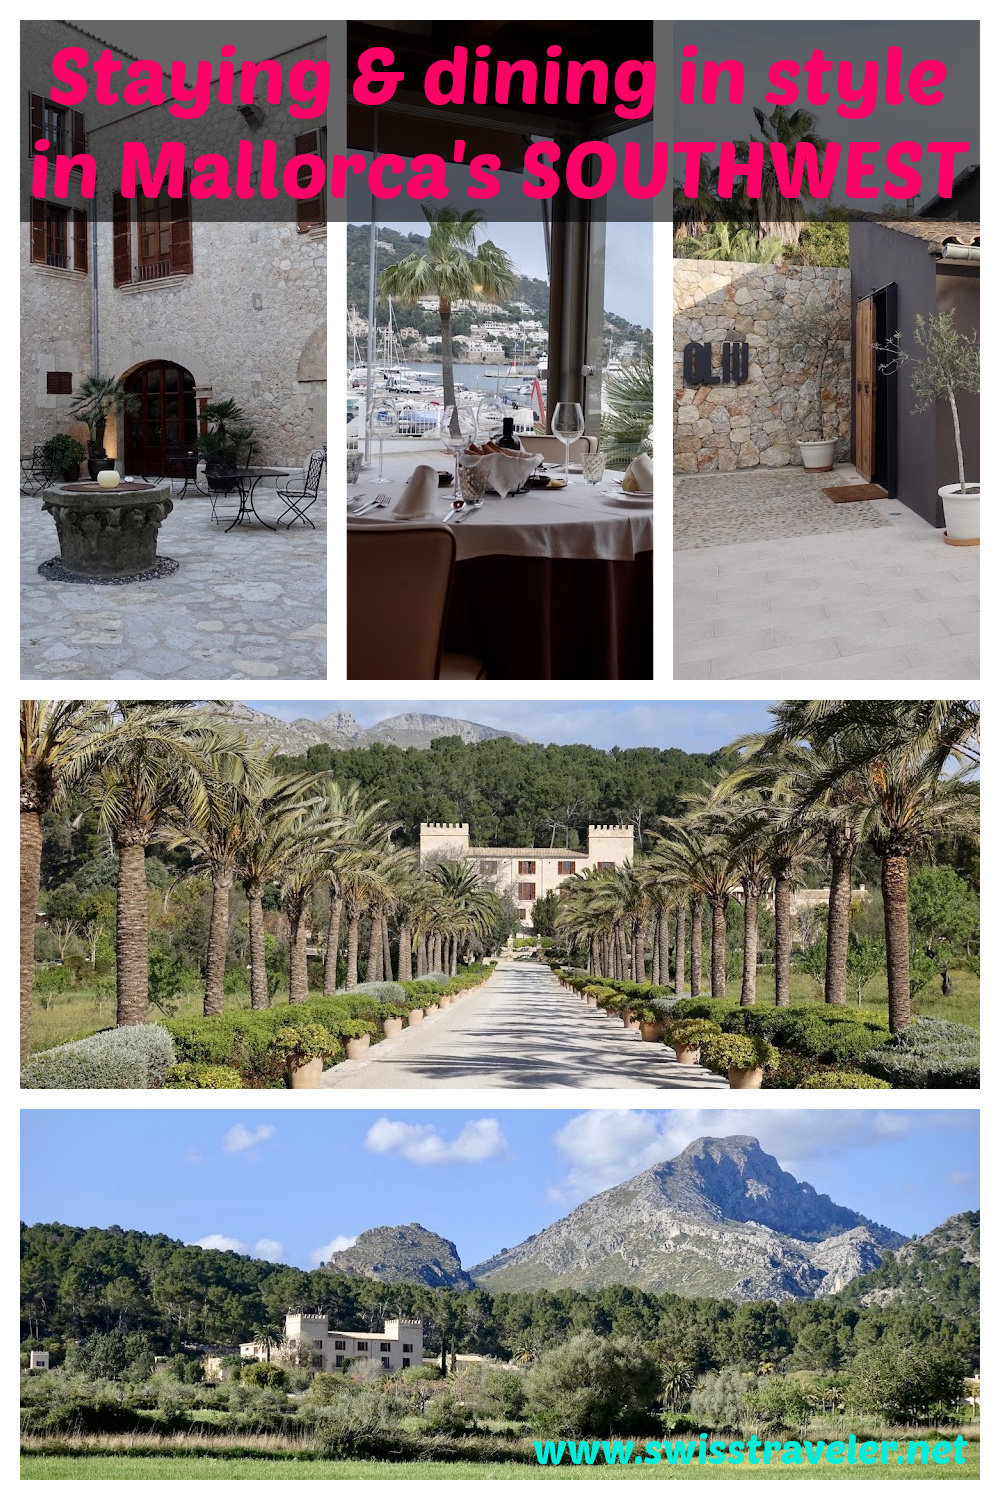 staying & dining in style in Mallorca's southwest 